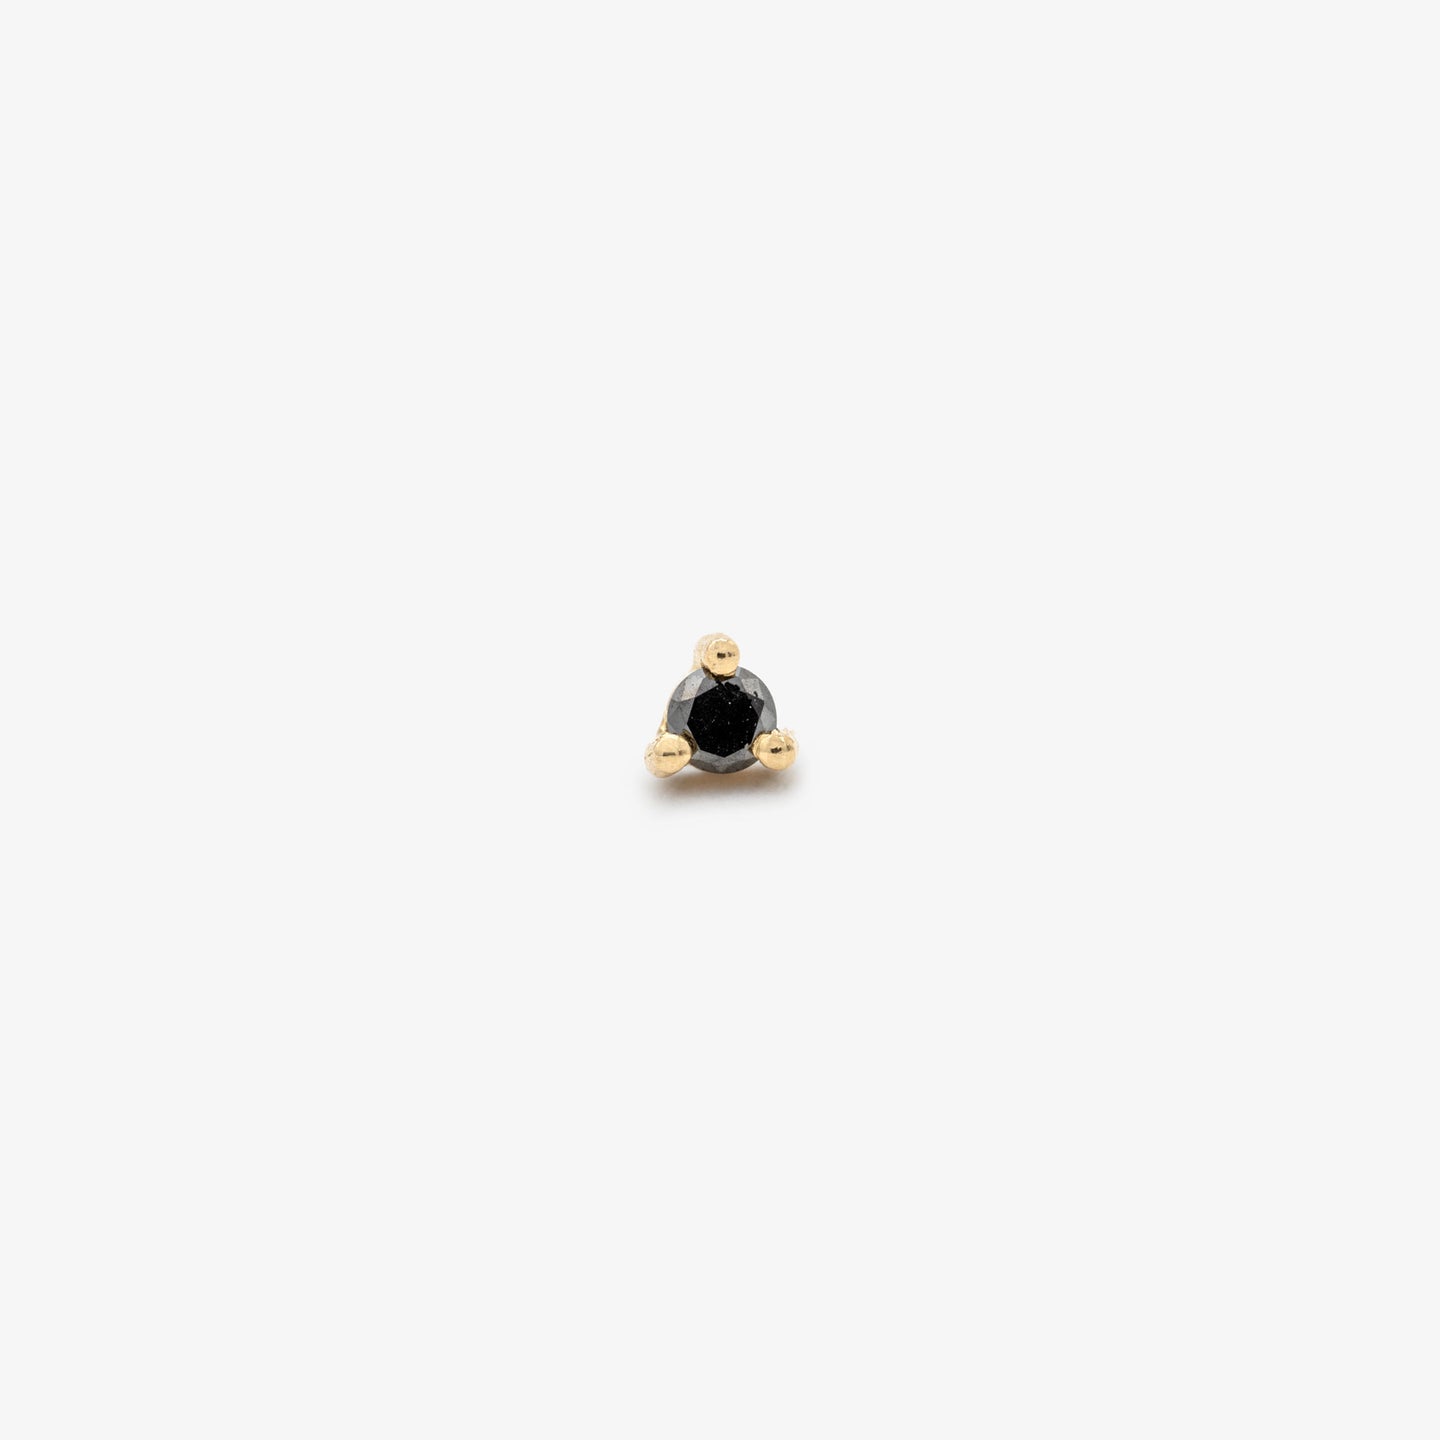 This is a small 14k gold stud with a black diamond that measures 2.5mm color:null|gold/black